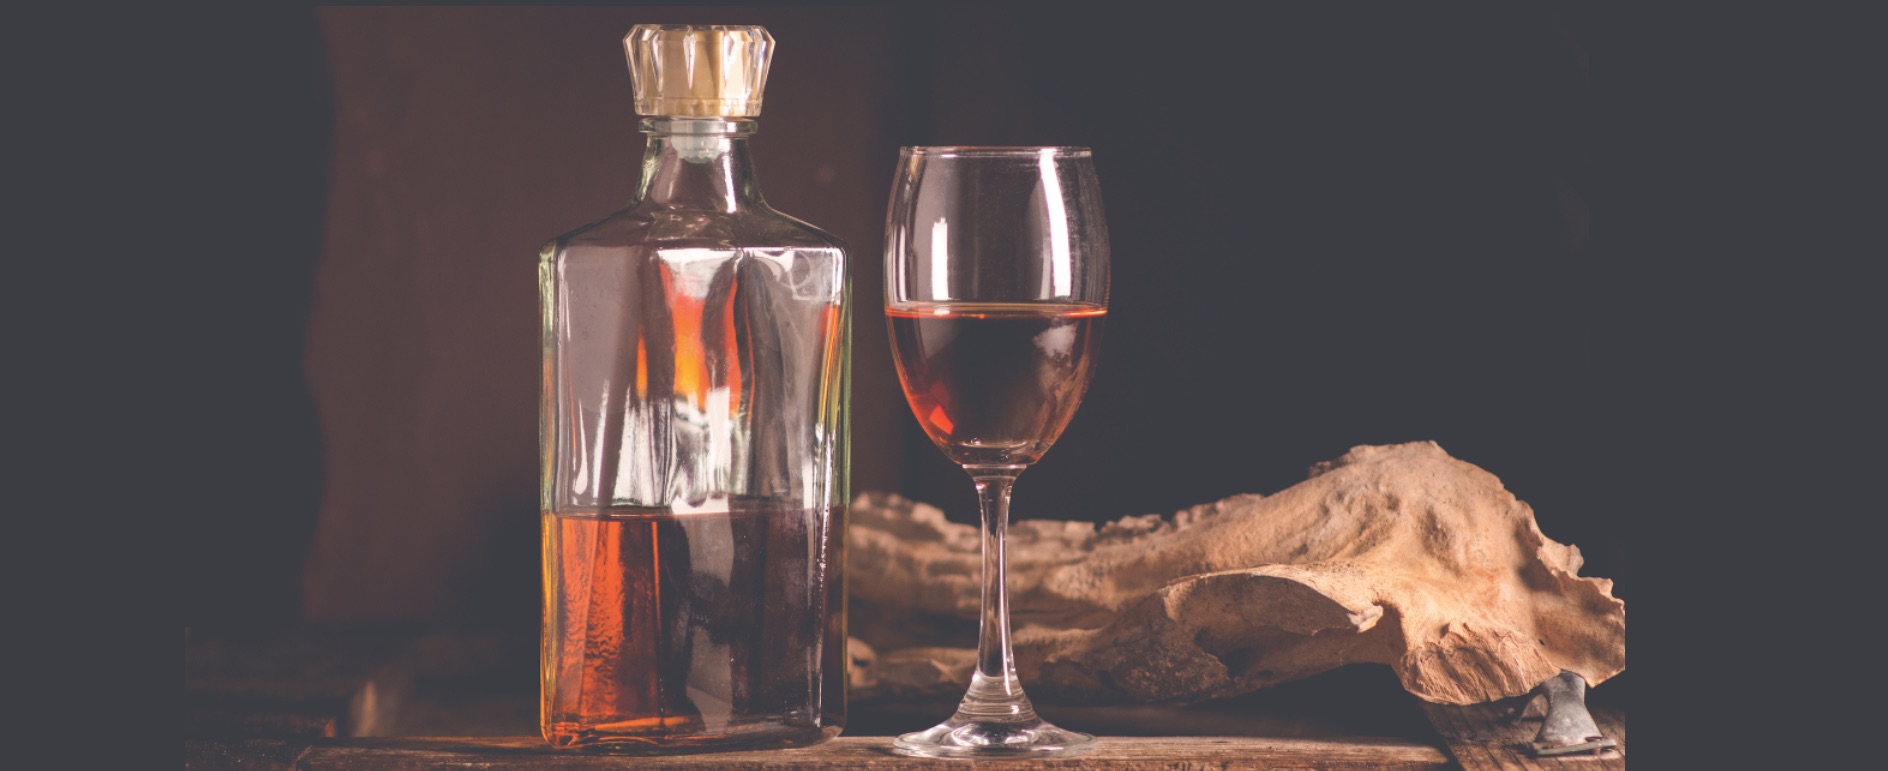 SPECIAL EVENT: Wine, Whiskey and Wisdom